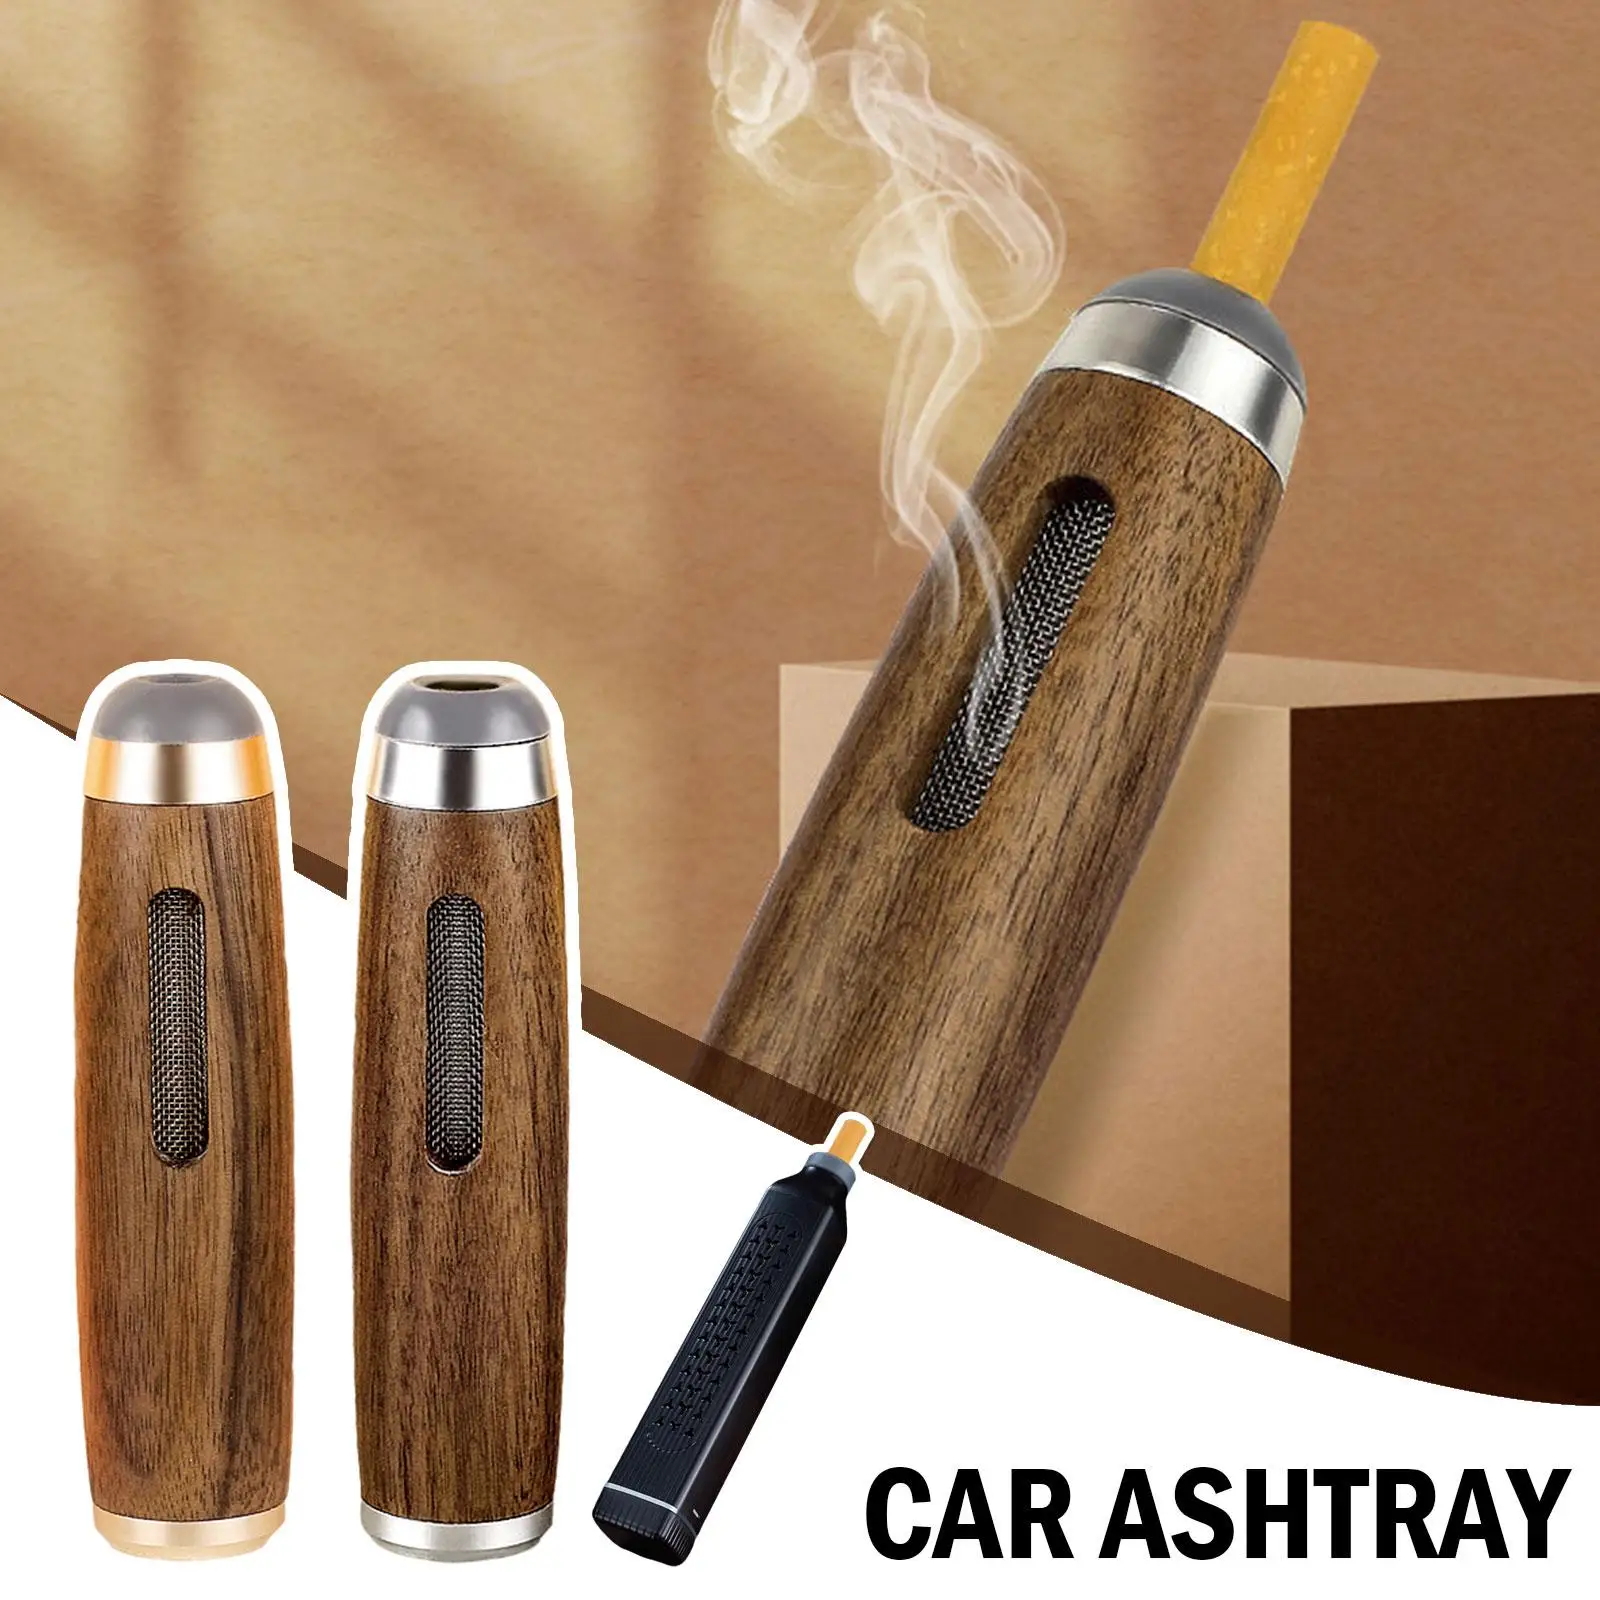 Portable Mini Ashtray Outdoor fireproof Ashtrays Wood Grain Relief Style Creative Ashtray For Car Driving Office Fishing Travel